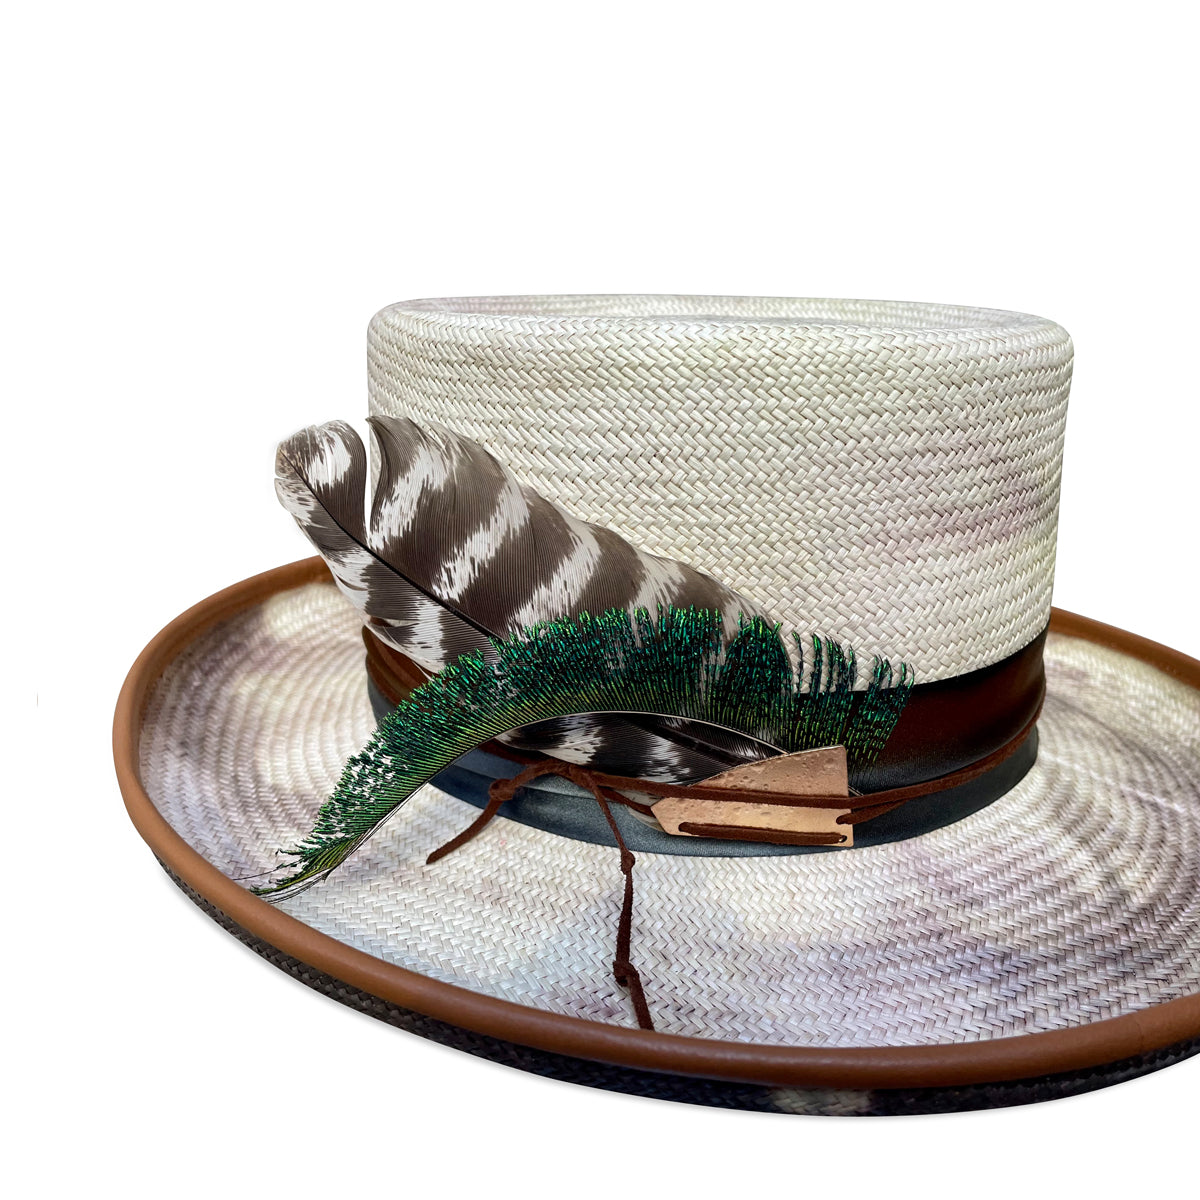 Elegant Gambler hat with tie-dye pattern, leather and silk trimmings, and a natural feather, made-to-order by Cha Cha's House of Ill Repute.